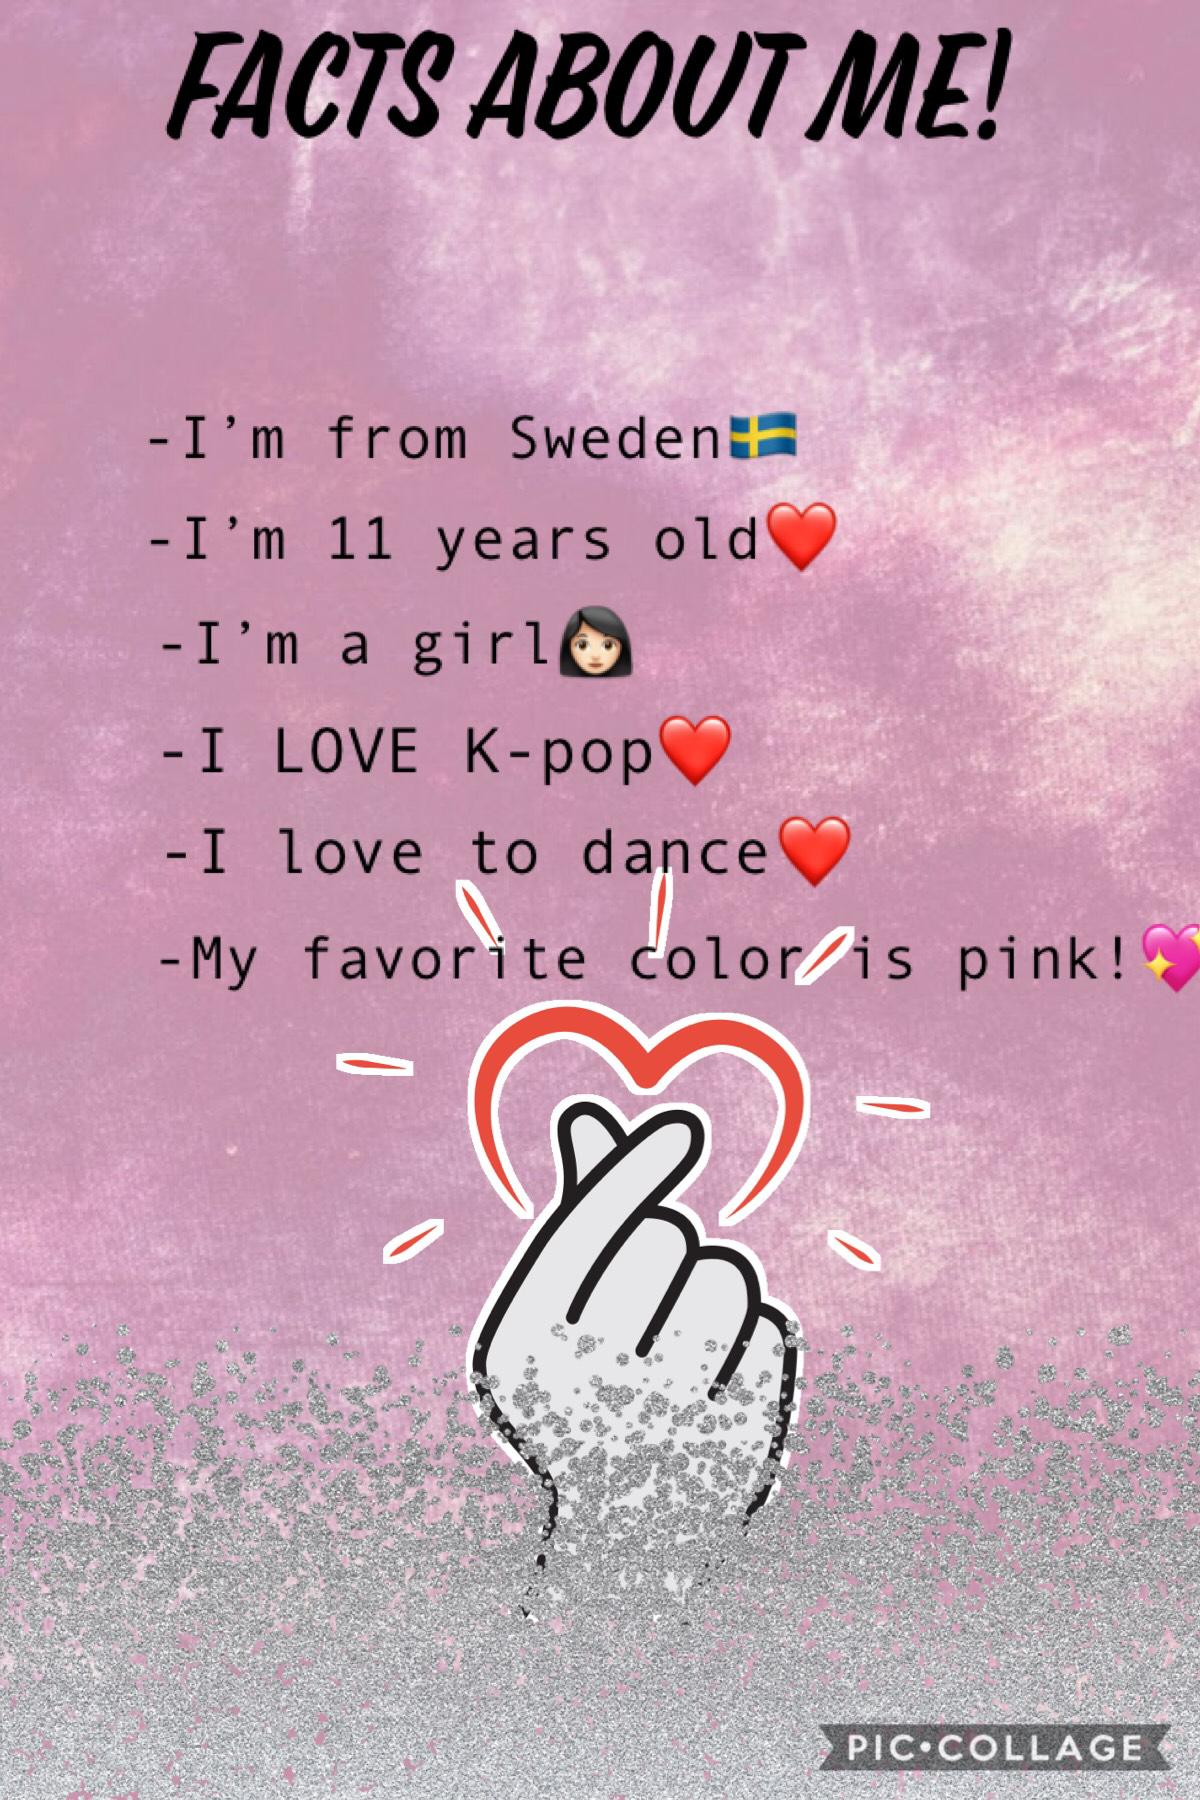 Facts about me! (Click)
❤️❤️❤️
This is facts about me!
❤️❤️❤️
I cant say my real name because my parents don’t want me to do that!!
❤️❤️❤️
Like,Follow,comment and share!!
❤️❤️❤️